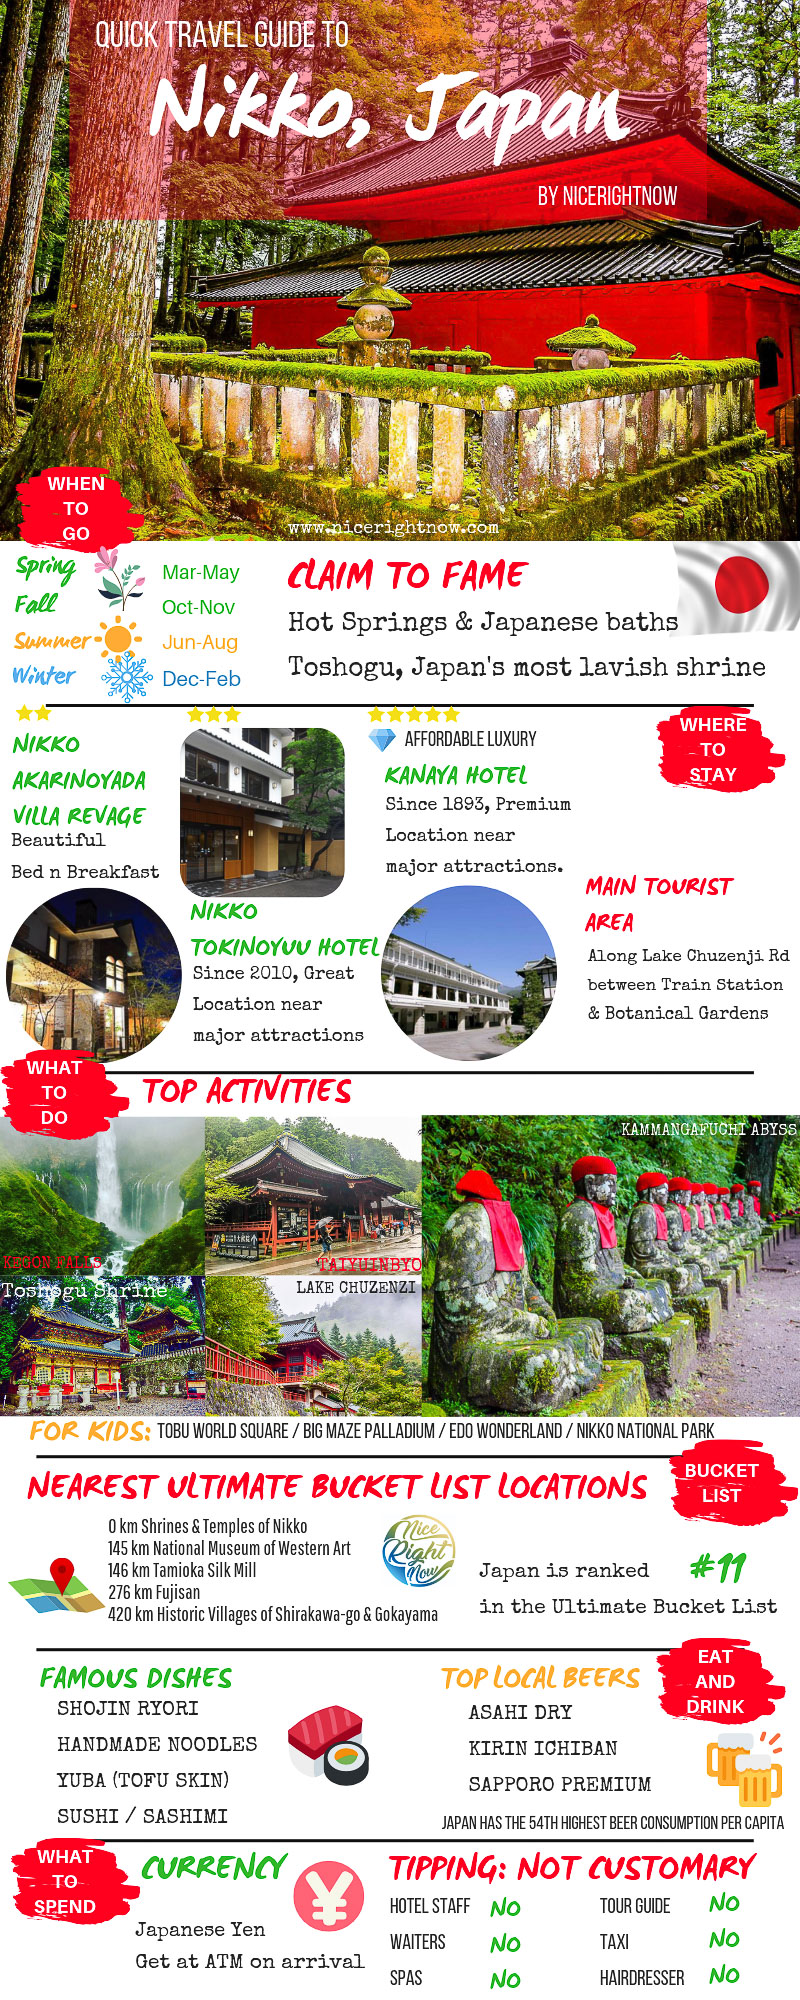 Quick Travel Guide to Nikko